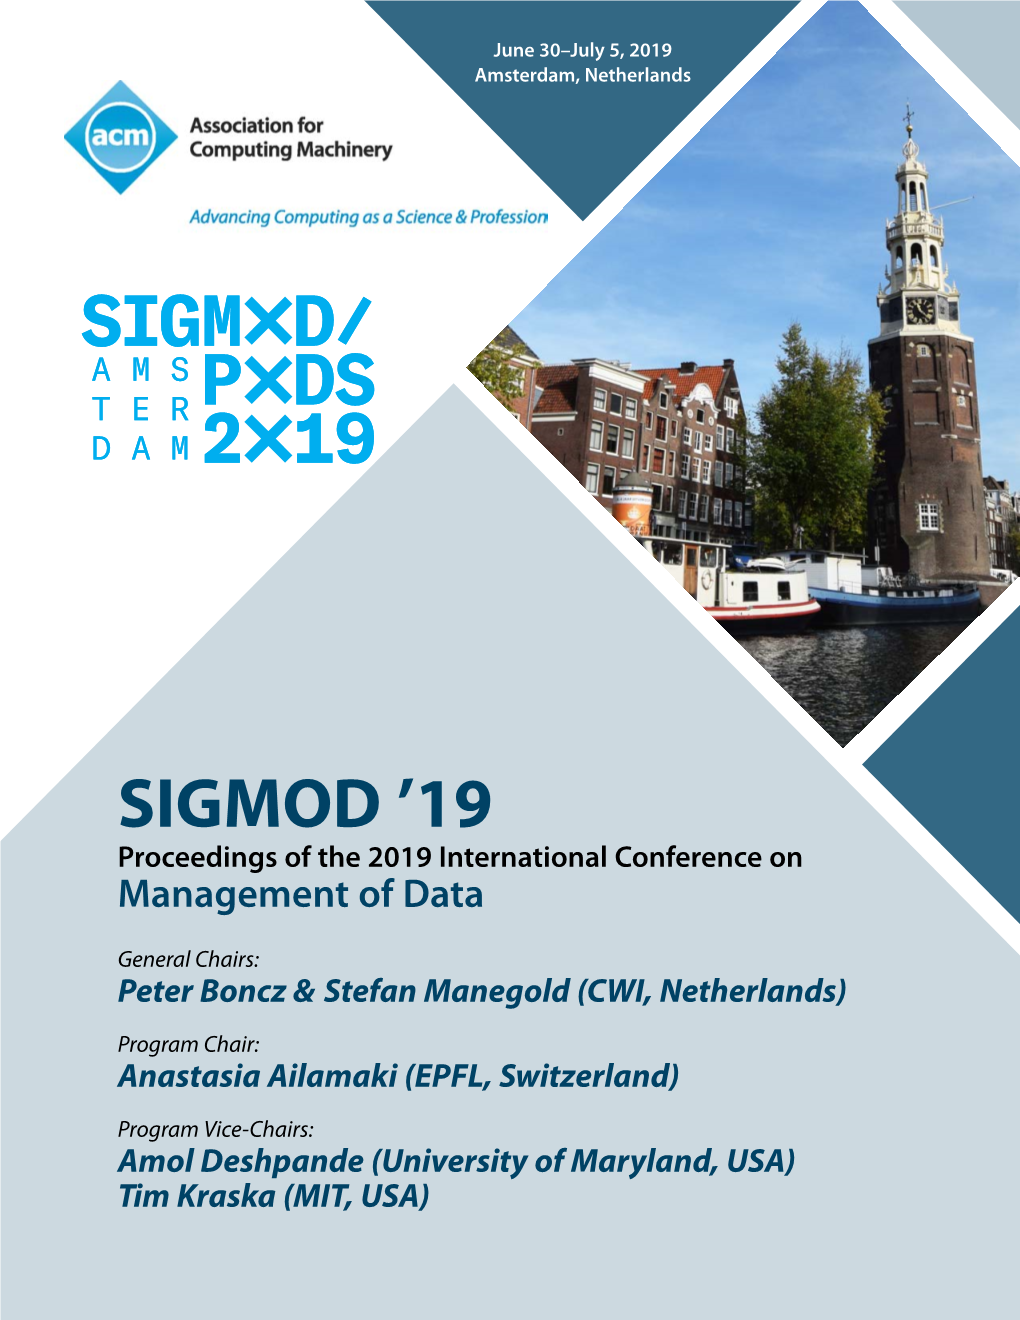 SIGMOD ’19 Proceedings of the 2019 International Conference on Management of Data